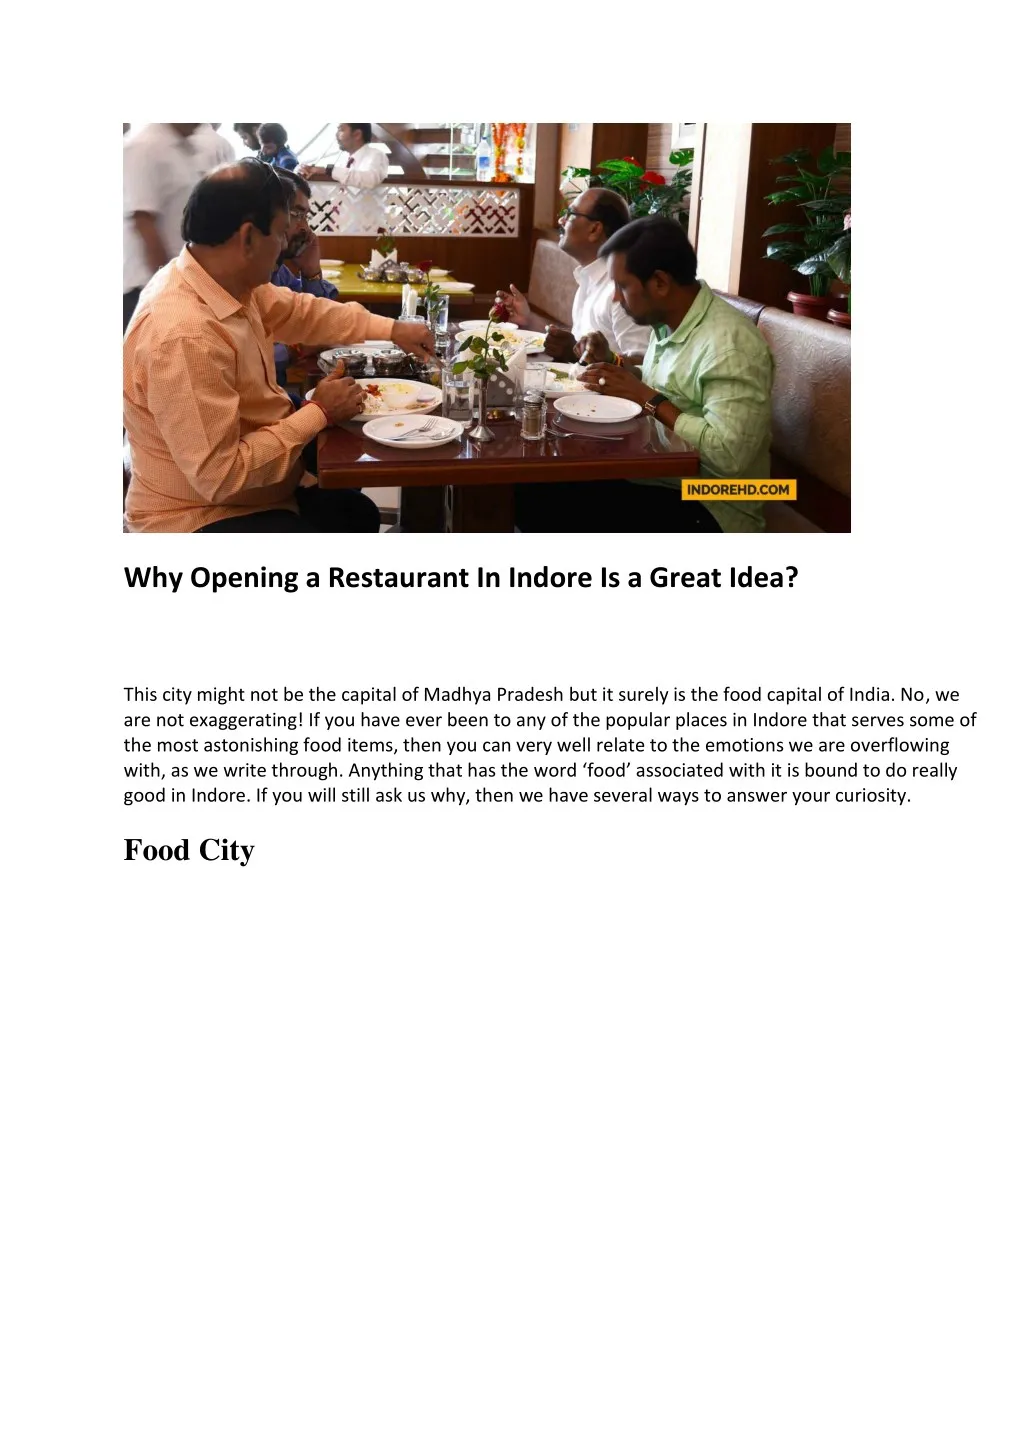 why opening a restaurant in indore is a great idea